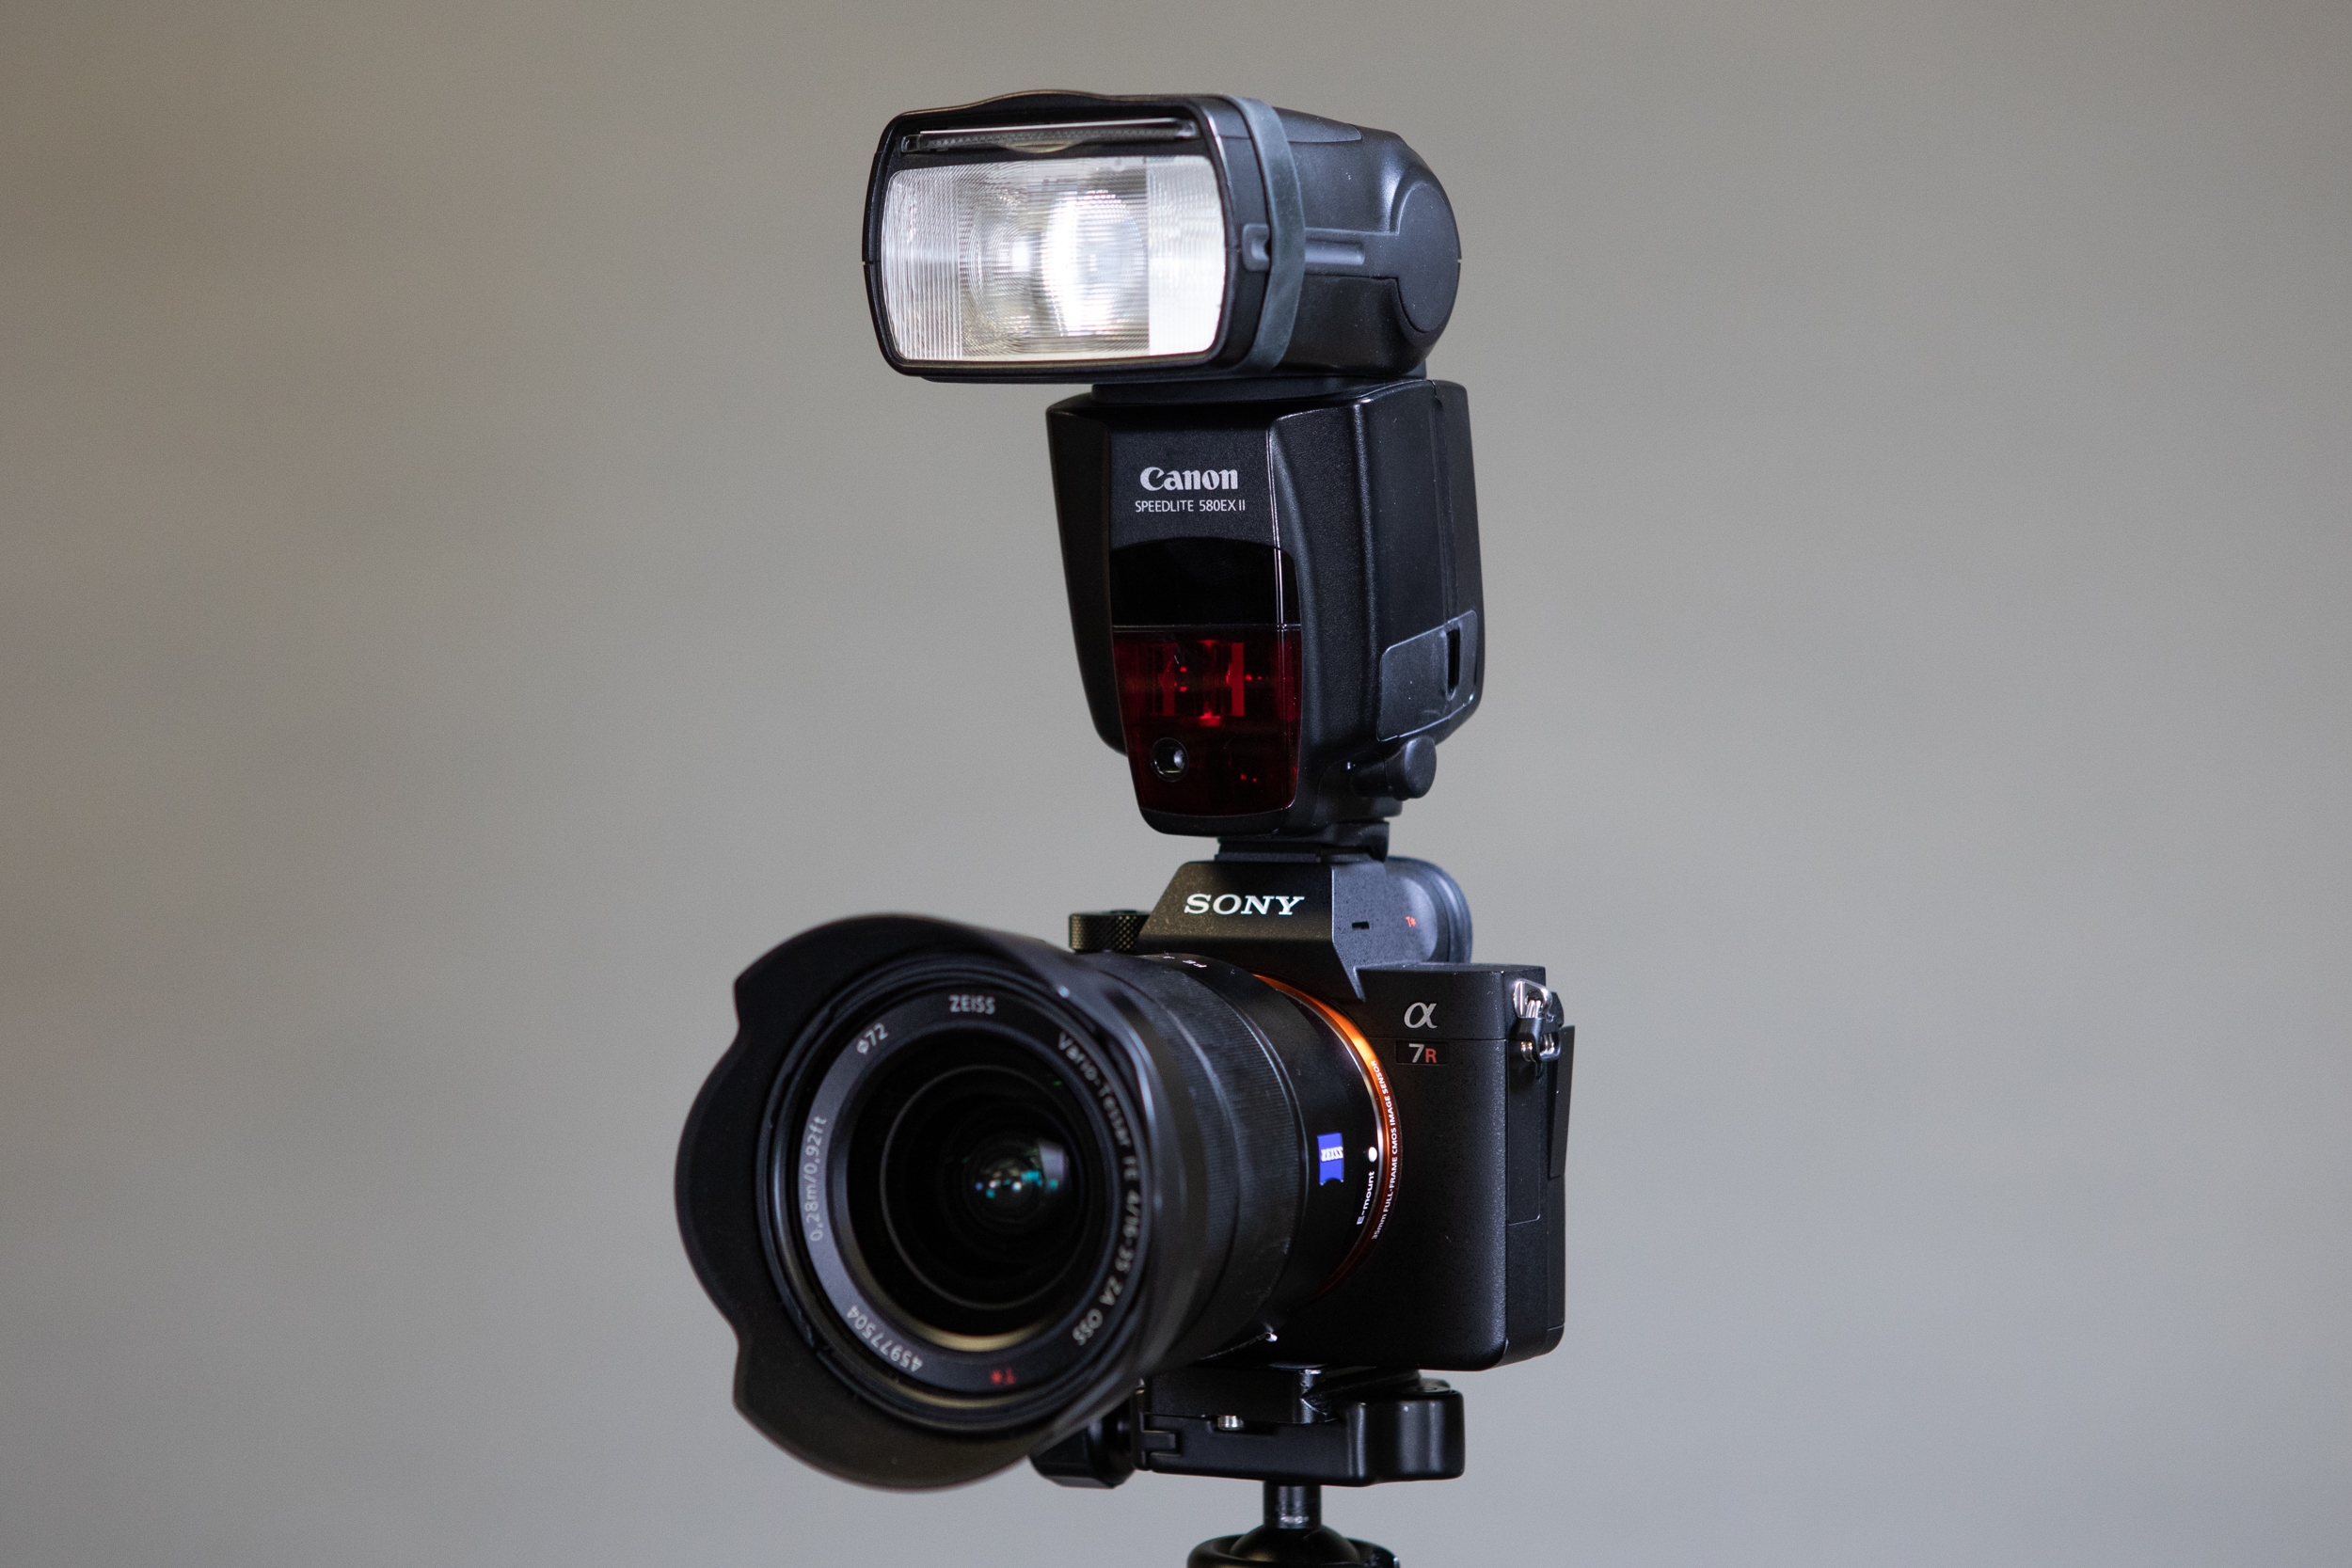 Top 5 Best Flash For Sony A7iiii and Sony A7R iii 